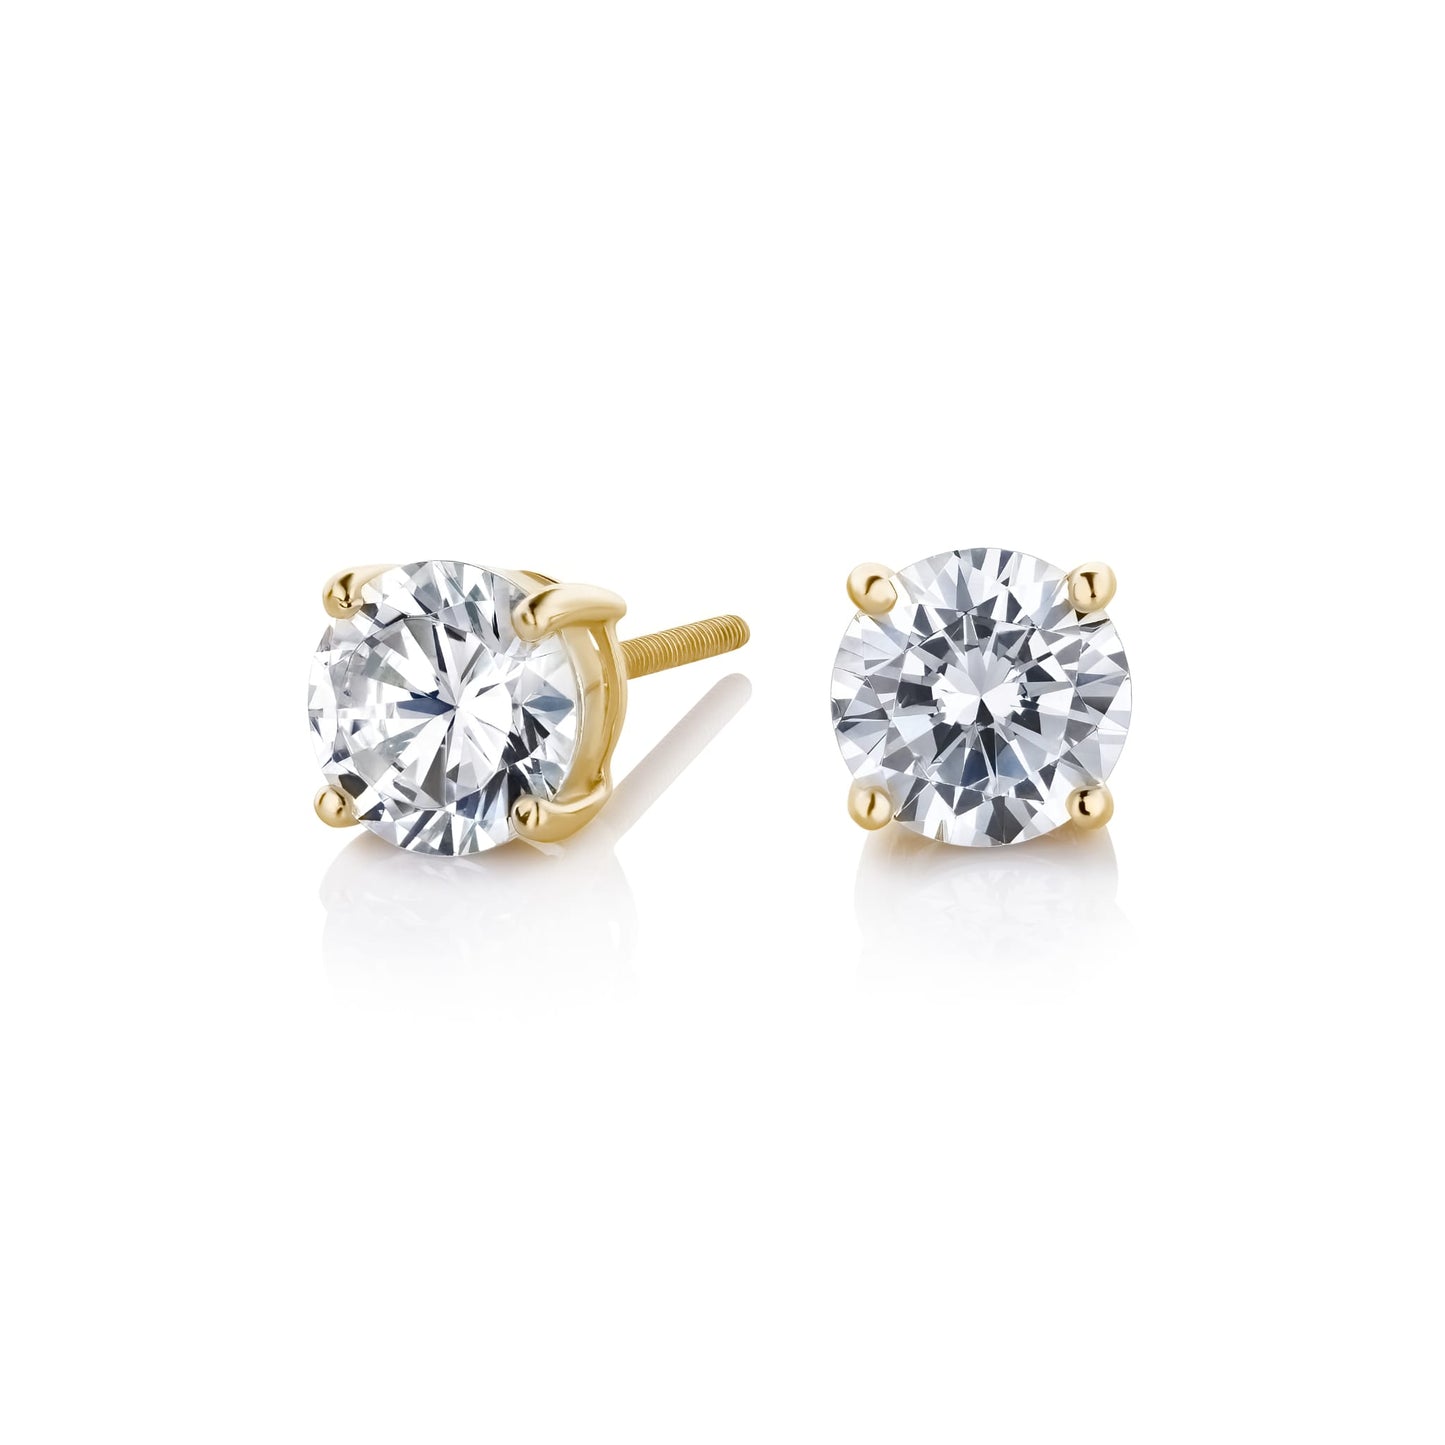 14K Gold Finish Solitaire/Princess Stud Earrings: Bestselling Brilliance